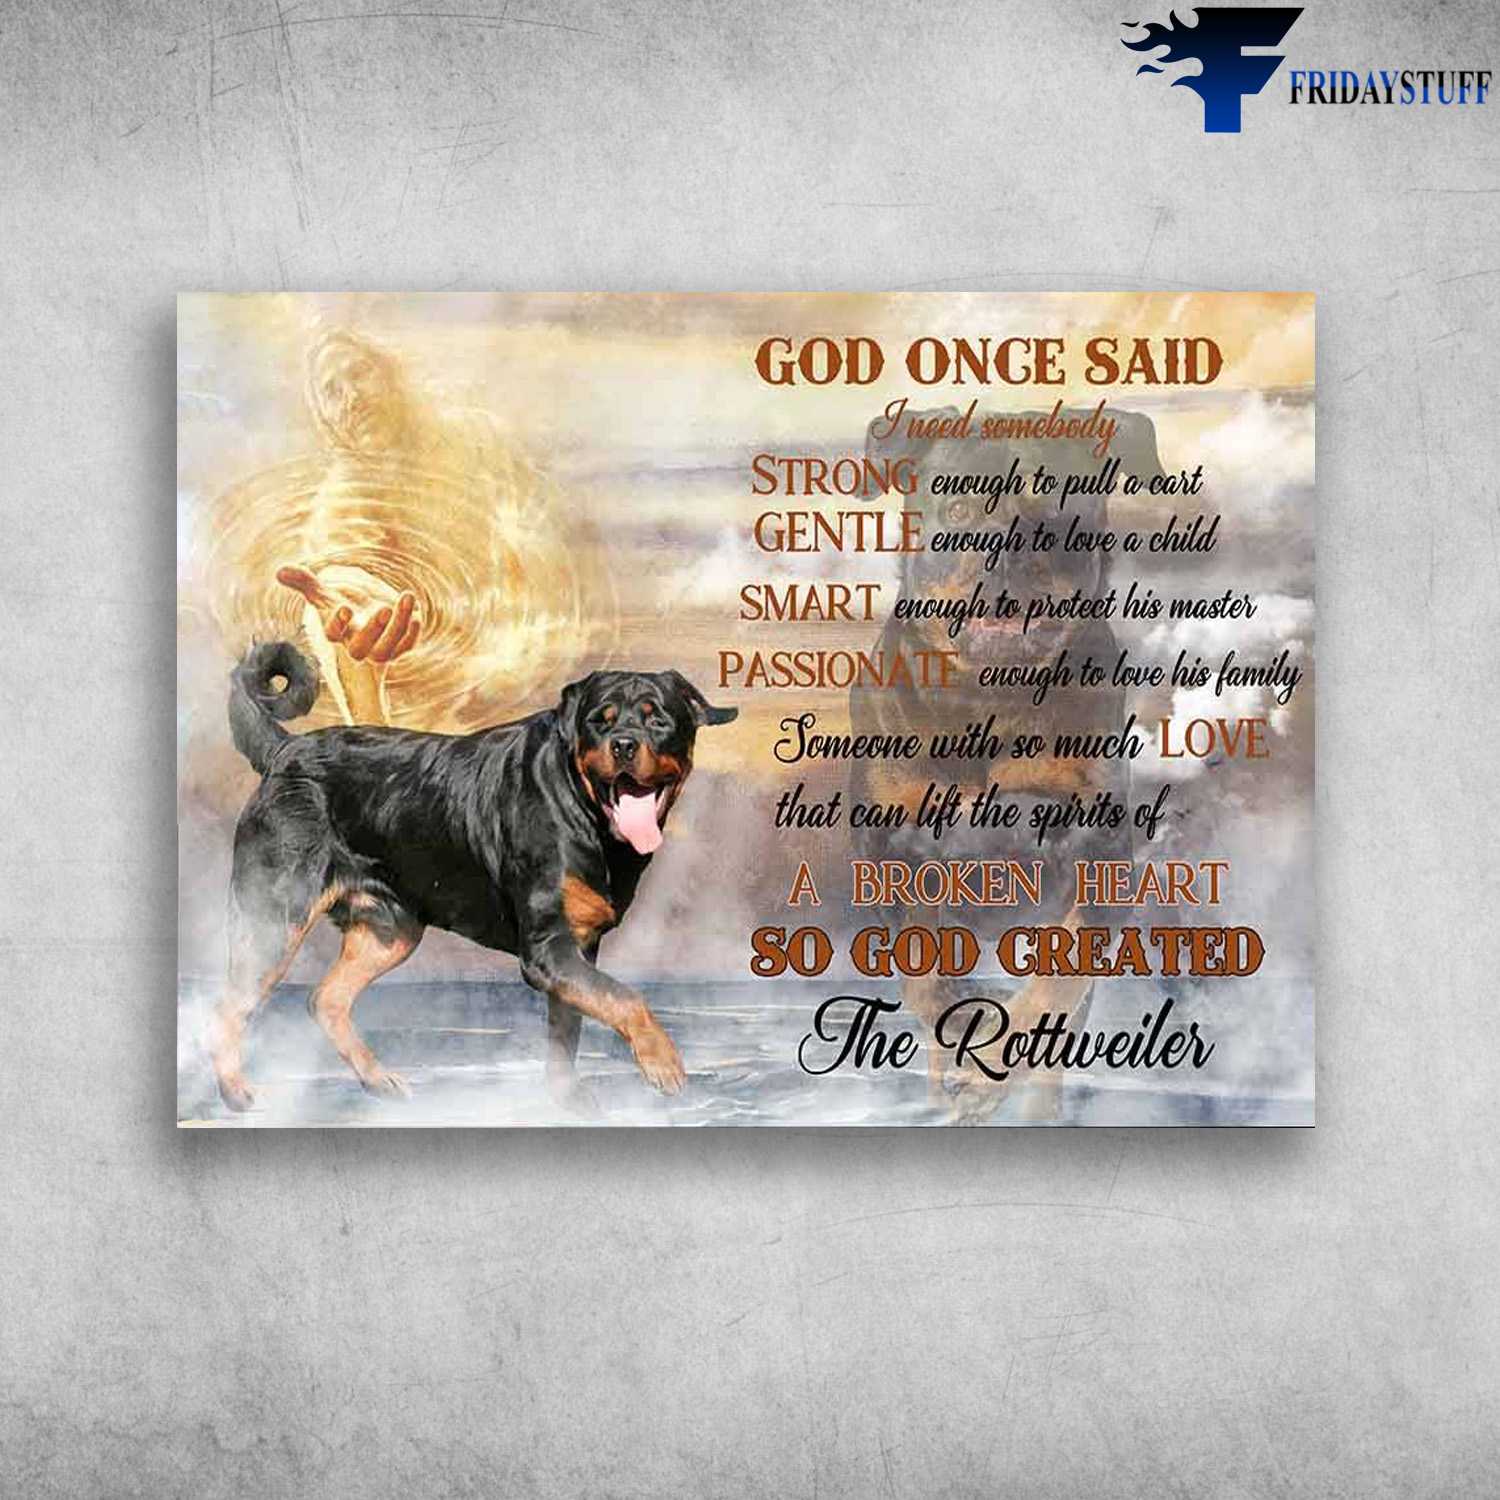 Rottweiler Dog - God Once Said, I Need Somebody, Strong Enough To Pull A Cart, Gentle Enough To Love A Child, Smart Enough To Protect His Master